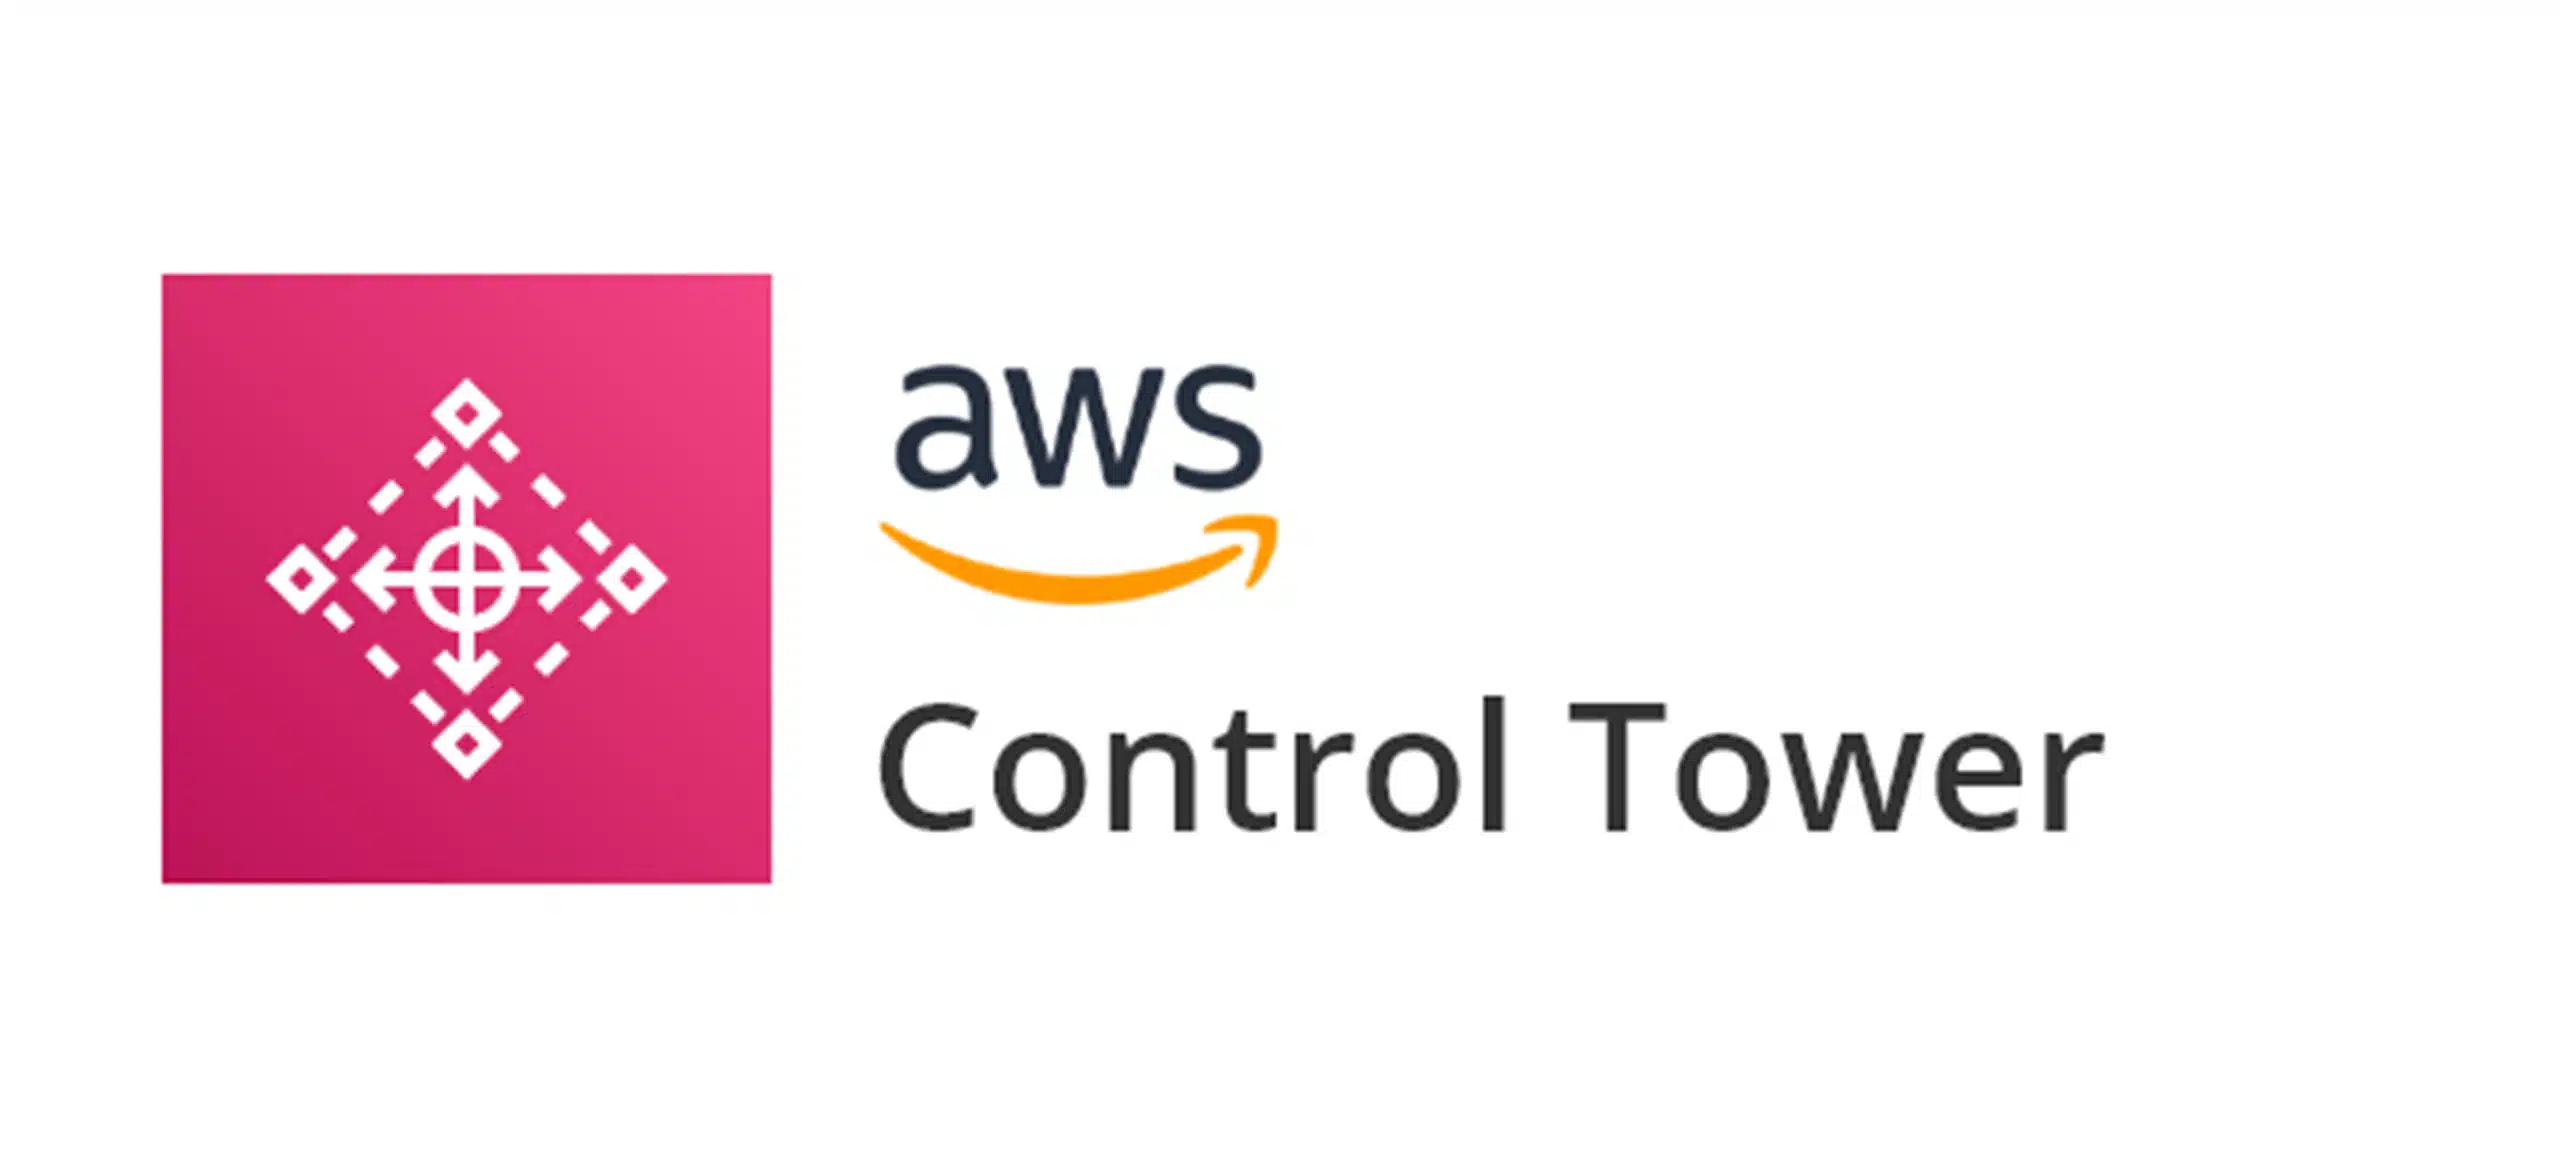 cloudnexa adds control tower and web application firewall to aws service delivery program capabilities